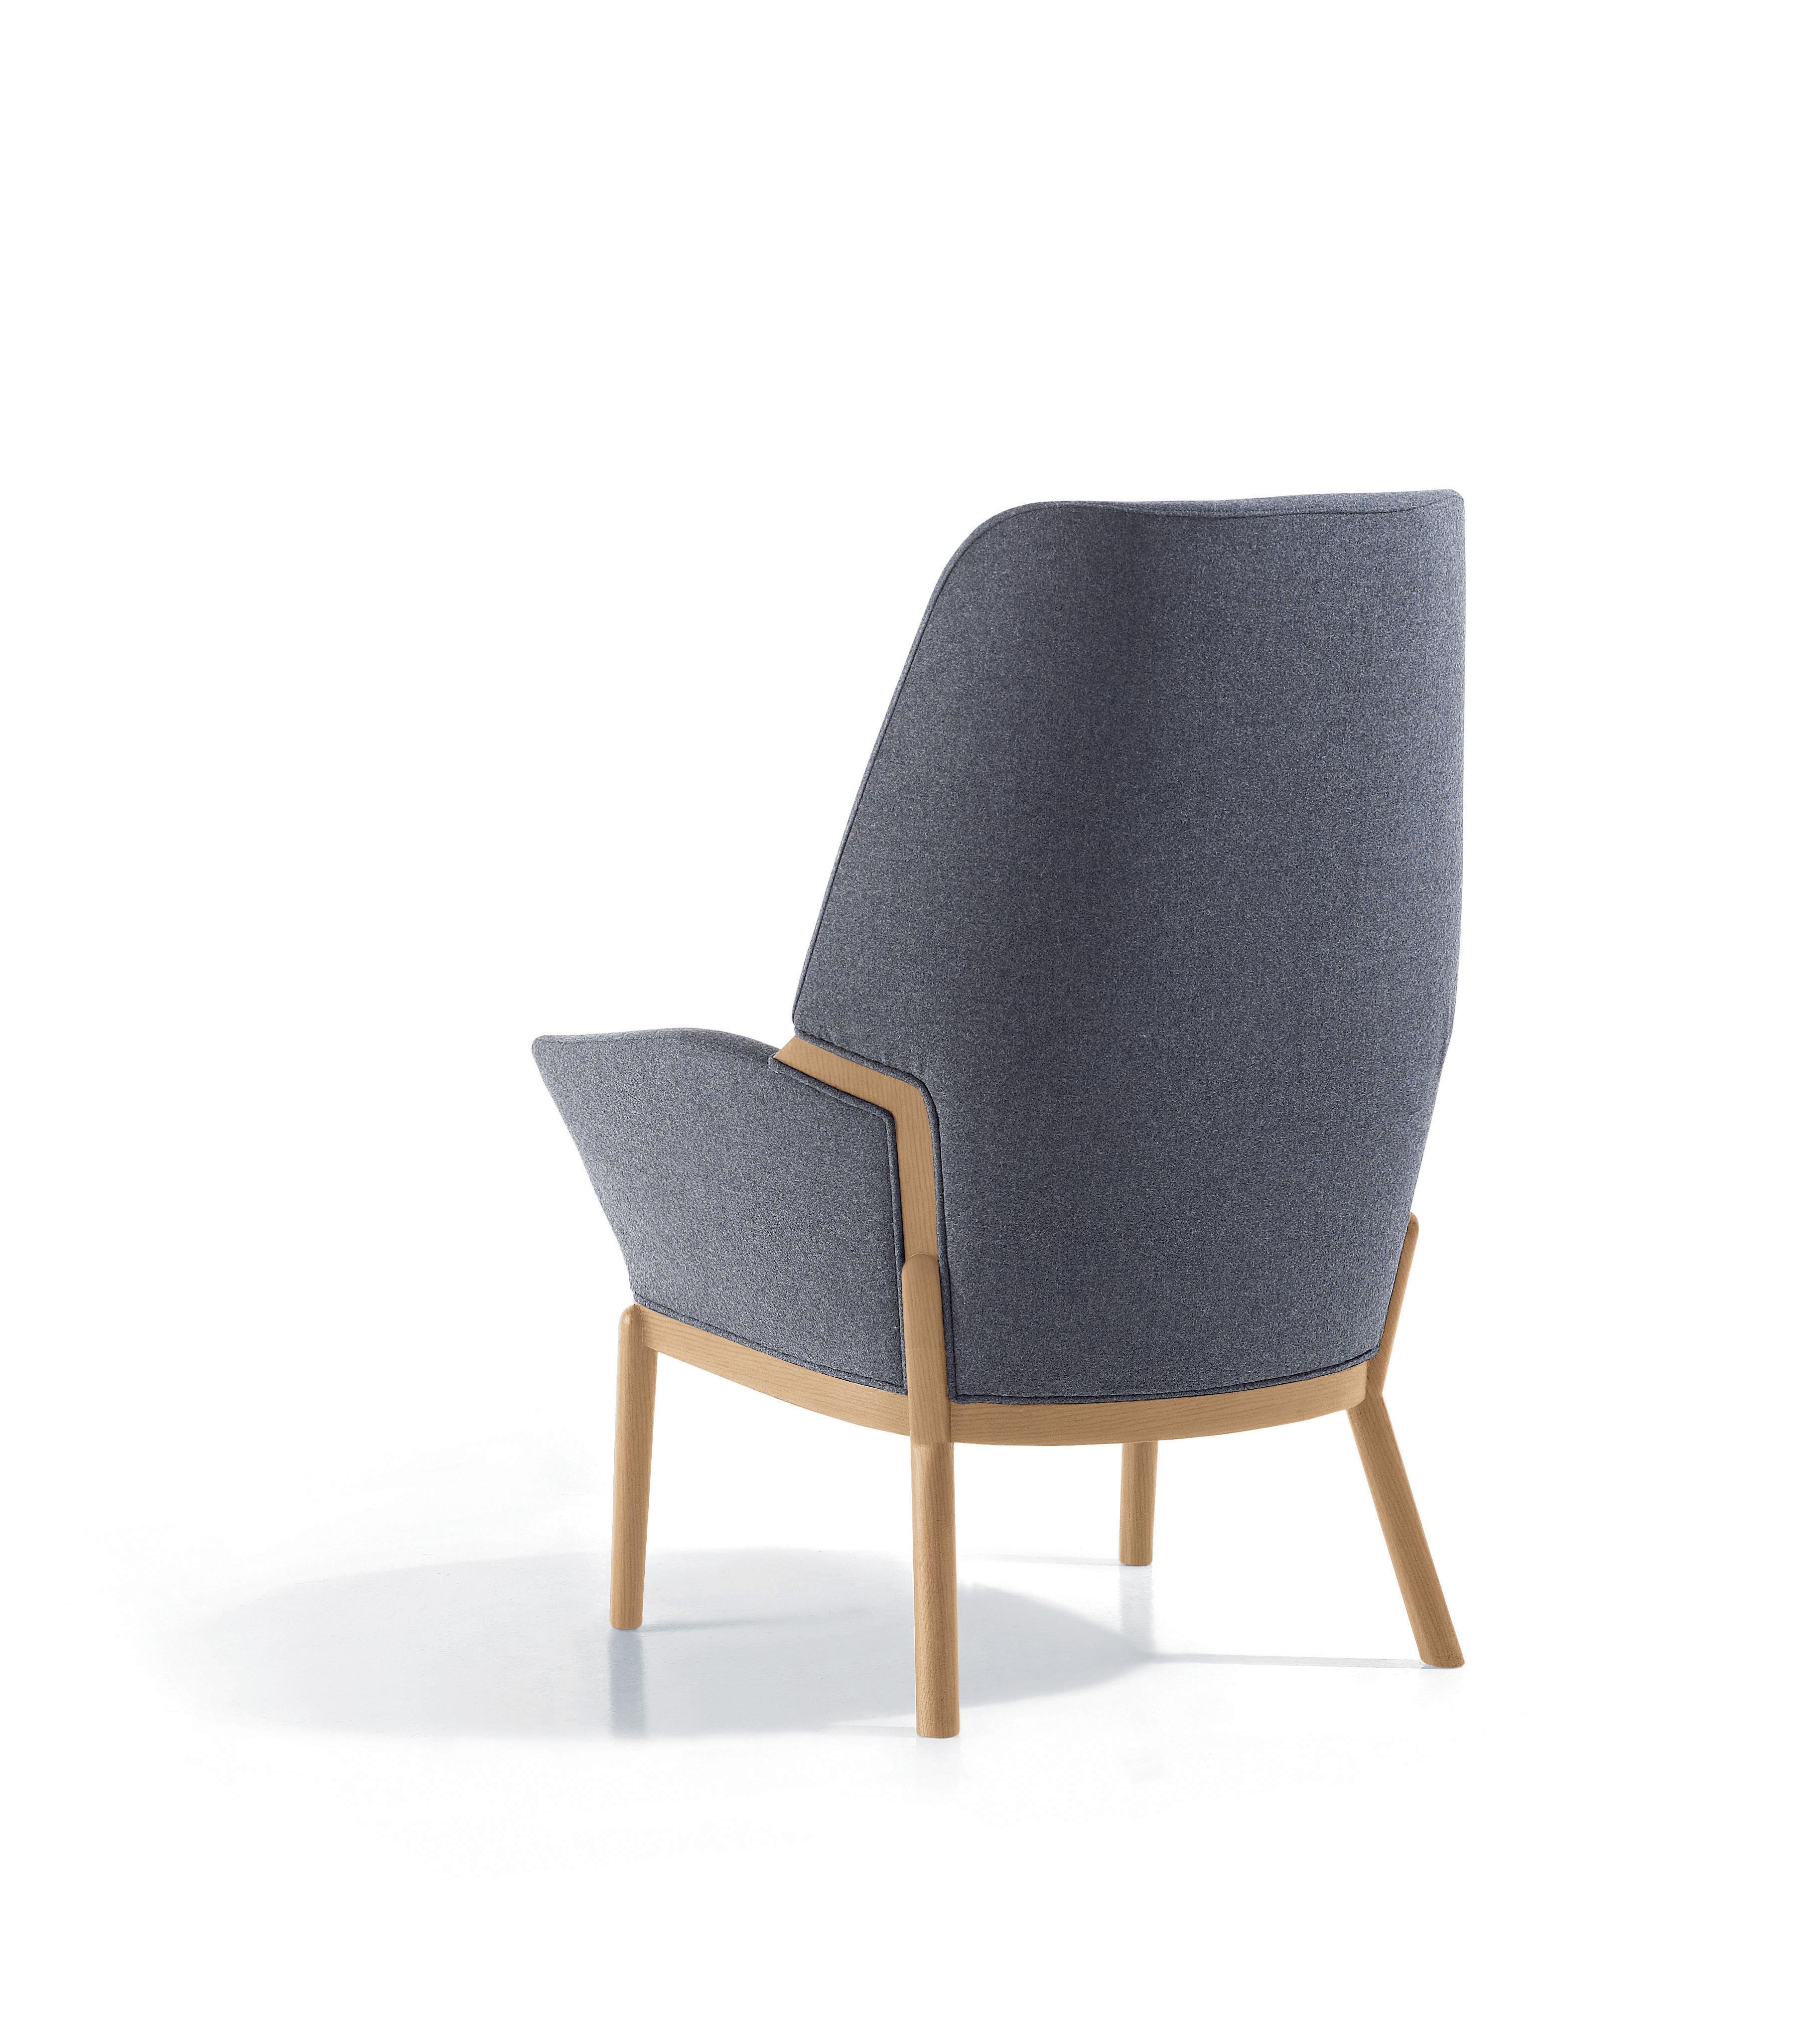 With Serena armchair and Doge pouf, Luca Nichetto has gone further, arriving to the archetype of the Venetian bergère and of its ottoman, both with wooden frame and textile cover, re-edited in a contemporary point of view. Arflex is a pillar of the